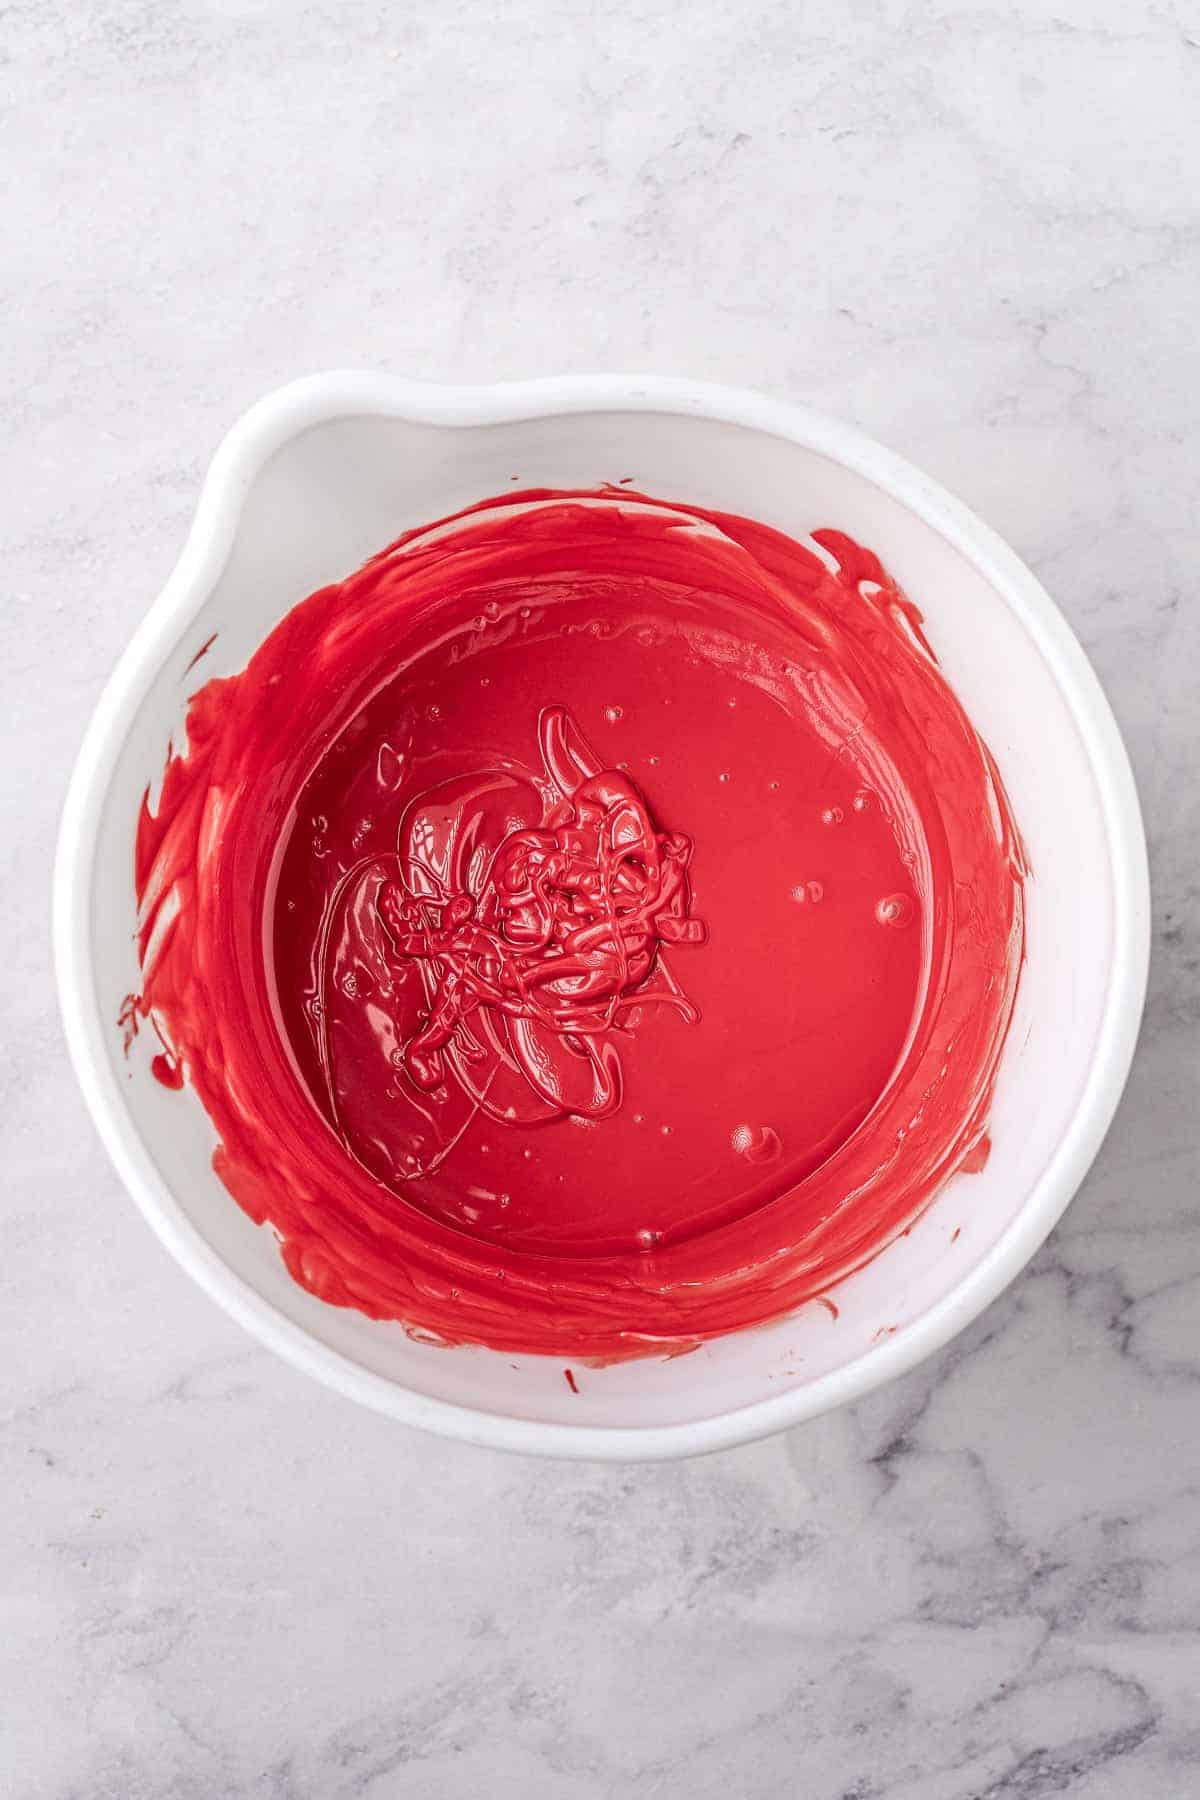 Melted Red Candy Melts in bowl